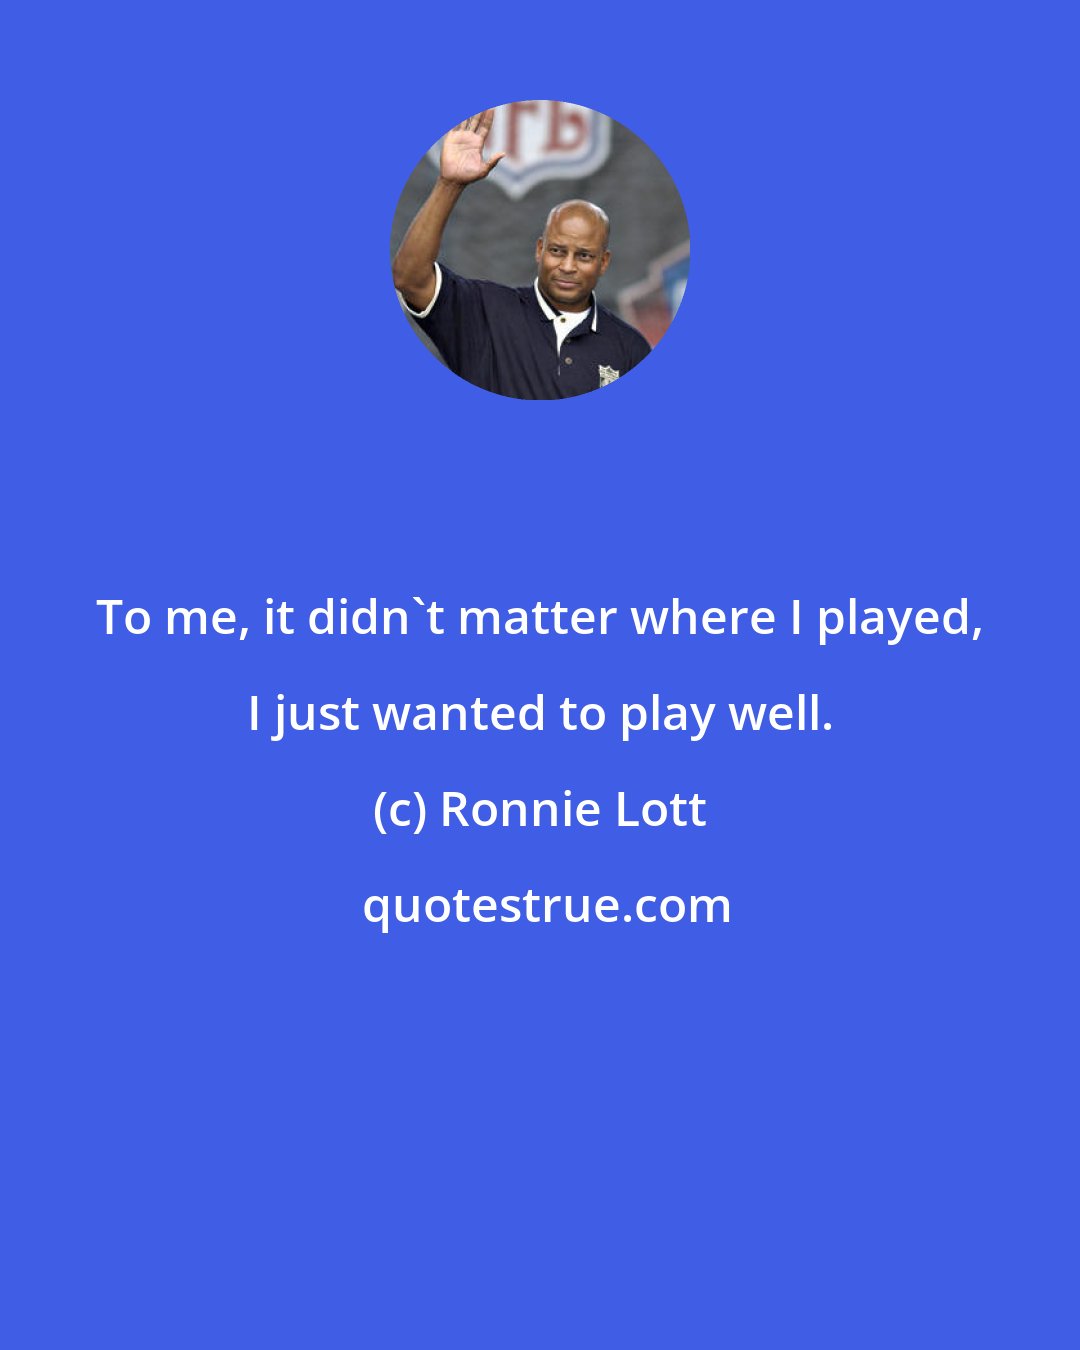 Ronnie Lott: To me, it didn't matter where I played, I just wanted to play well.